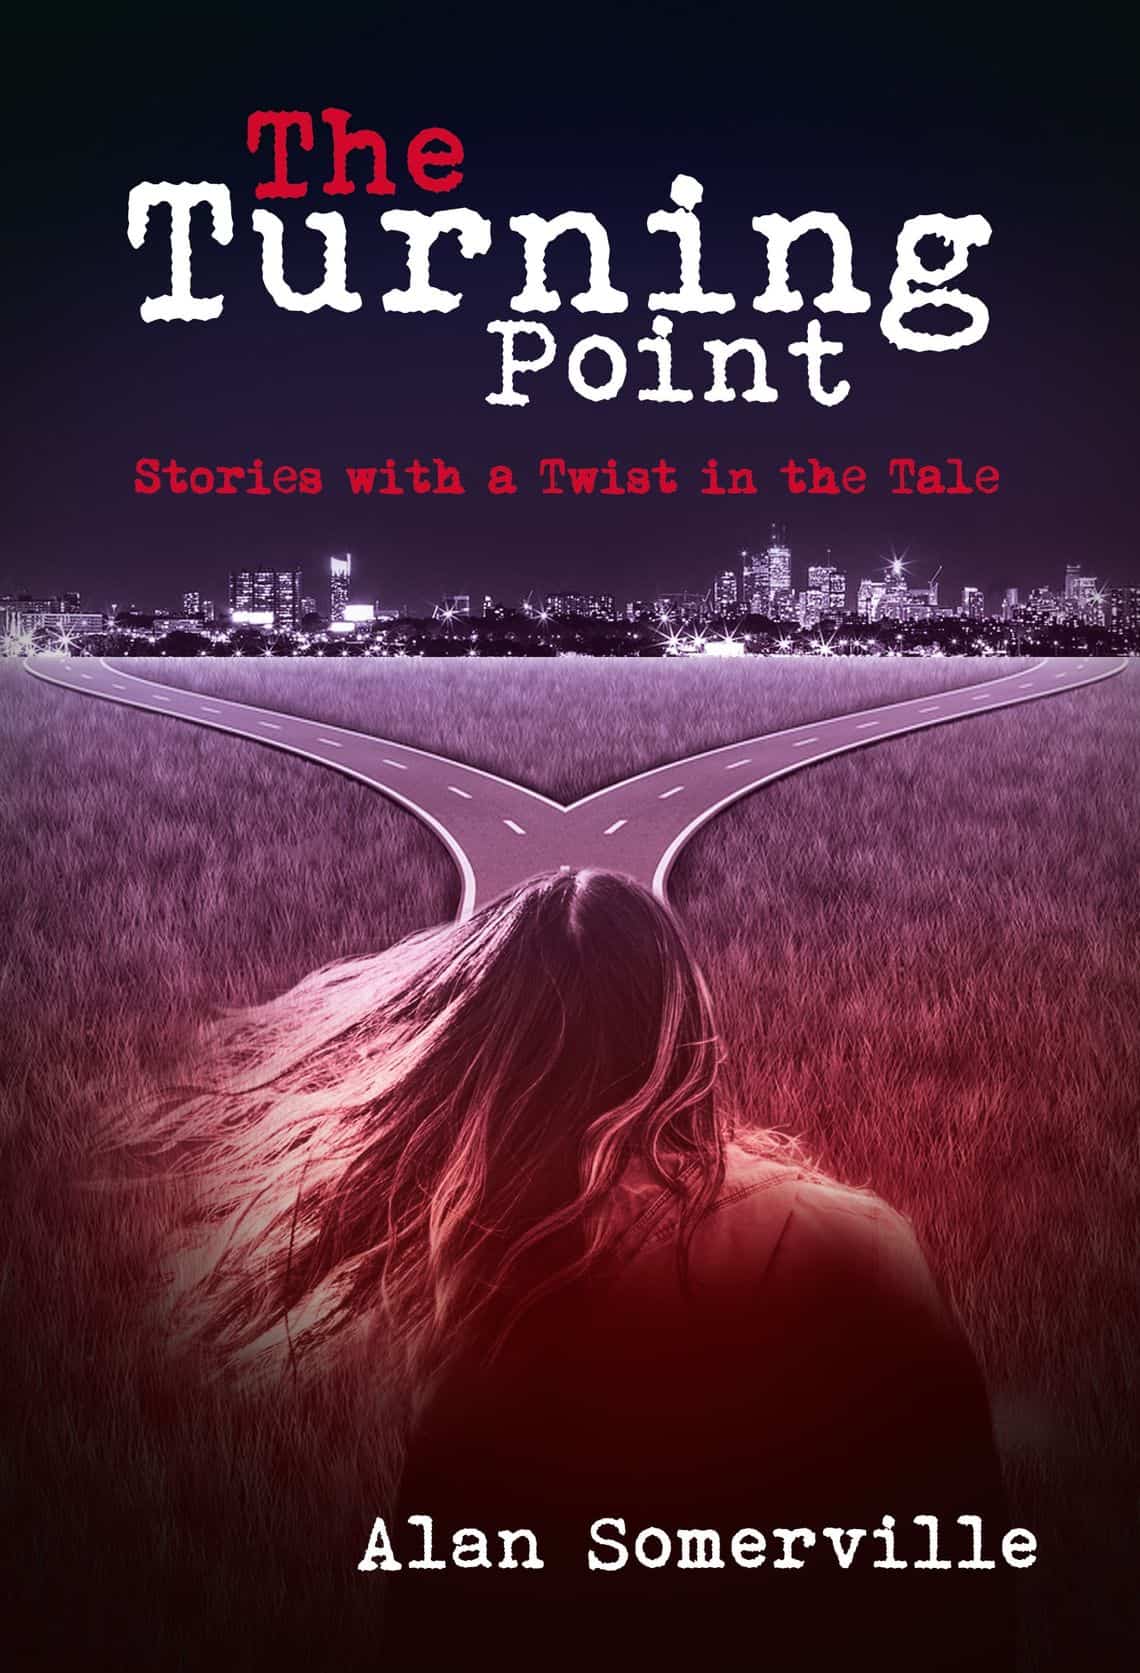 Behind the story of The Turning Point